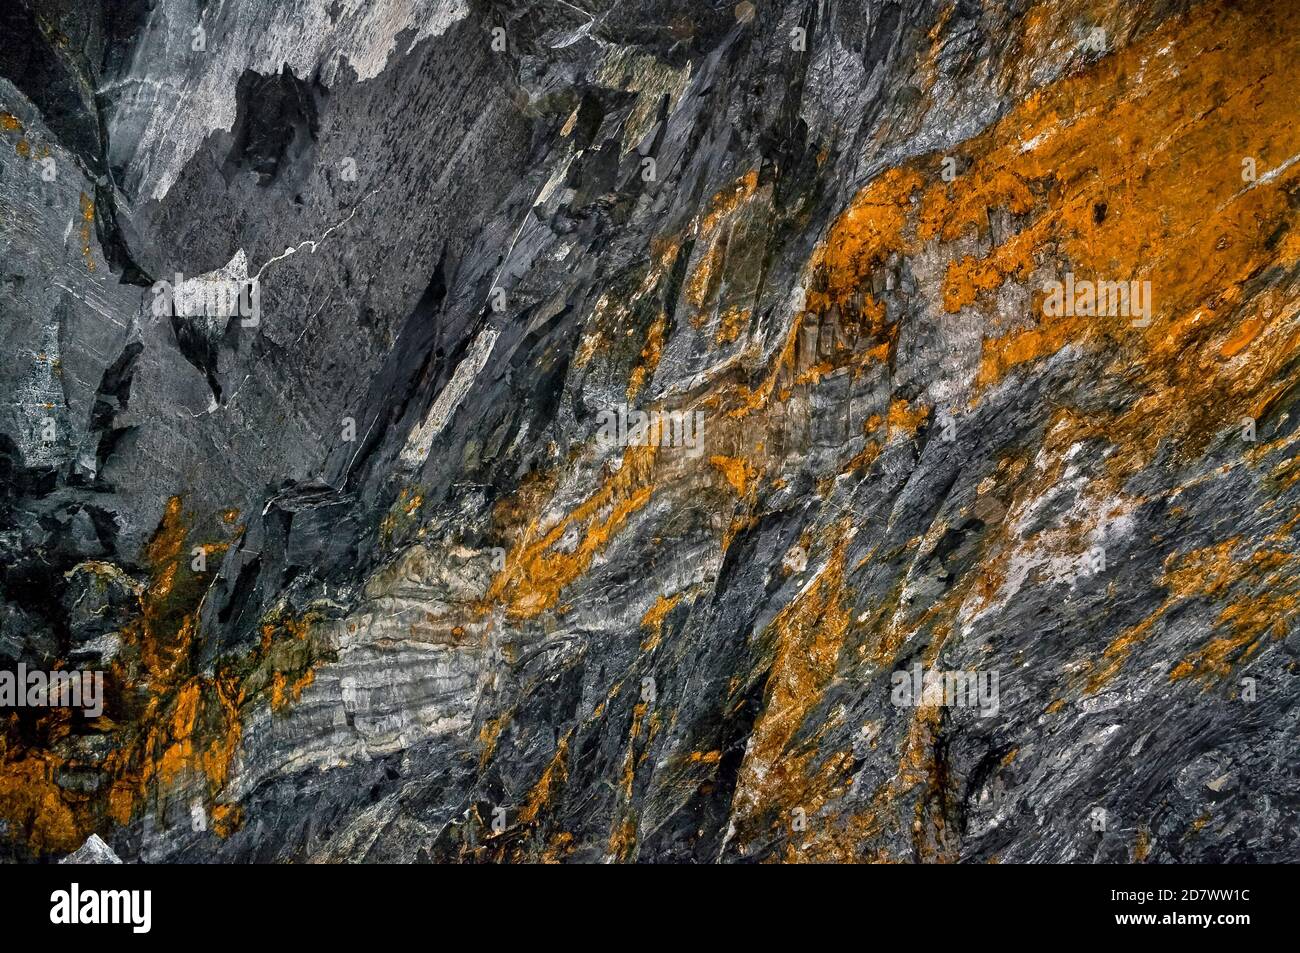 Abstract image of reflective slate blocks with mineral veins fallen from the roof in Croesor slate mine, North Wales. Stock Photo